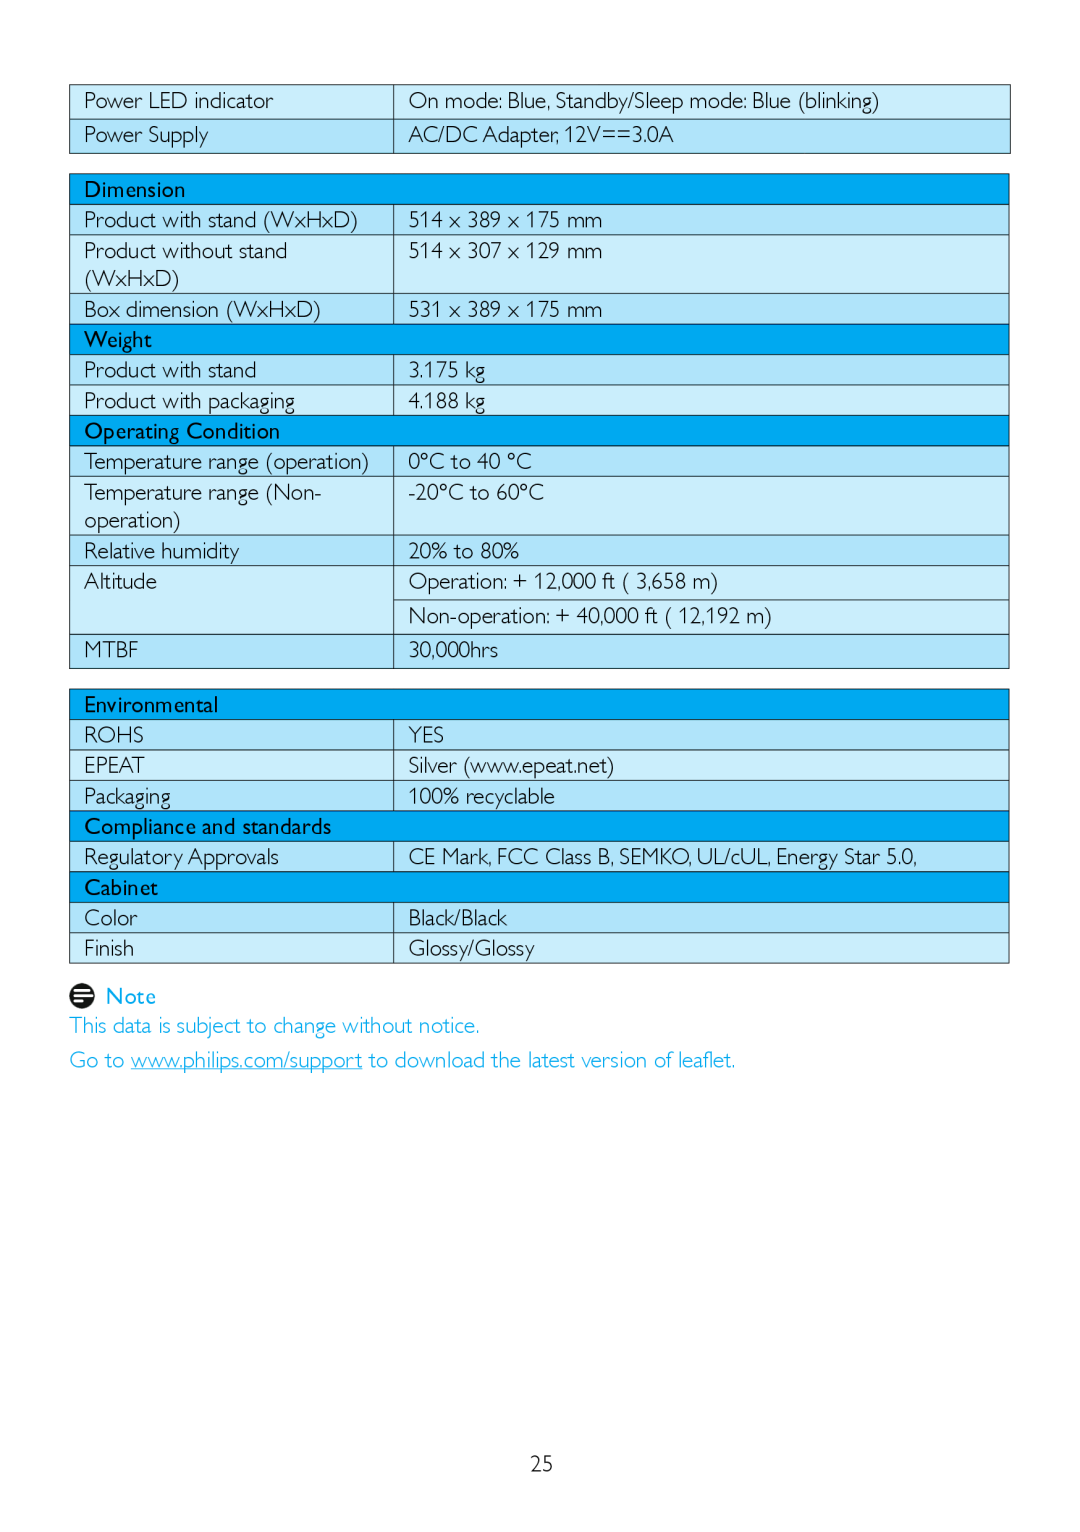 Philips 224CL2 user manual This data is subject to change without notice, Temperature range operation 